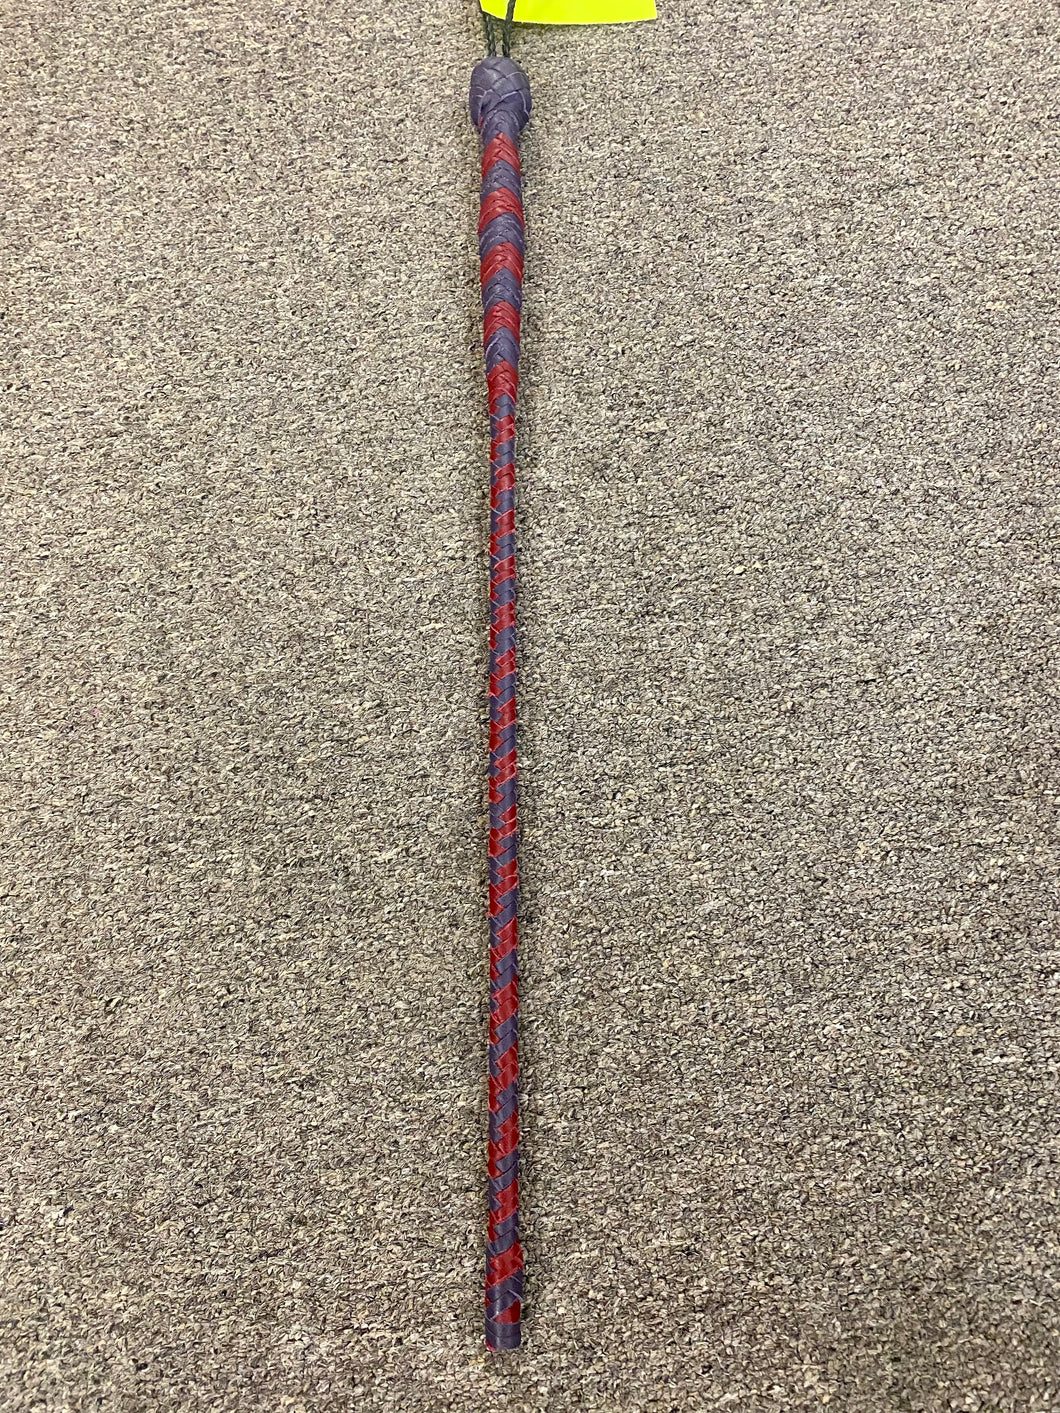 PURPLE AND RED LEATHER CROP END CANE BY DAN HOUCHINS